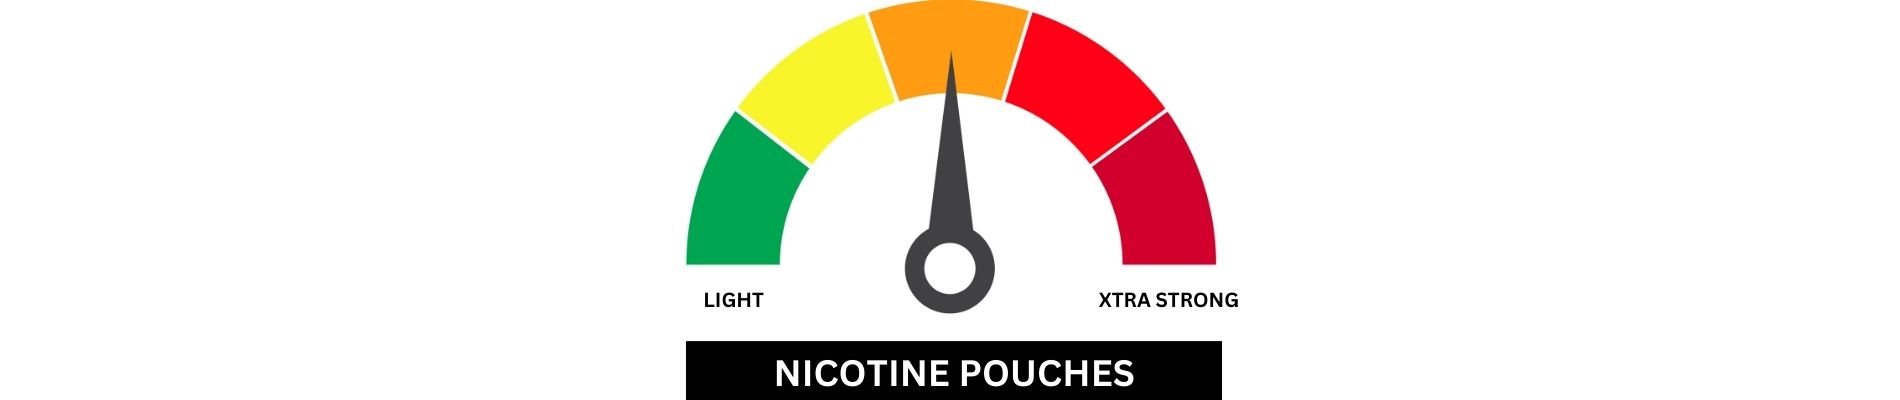 Strength Nicotine Pouches